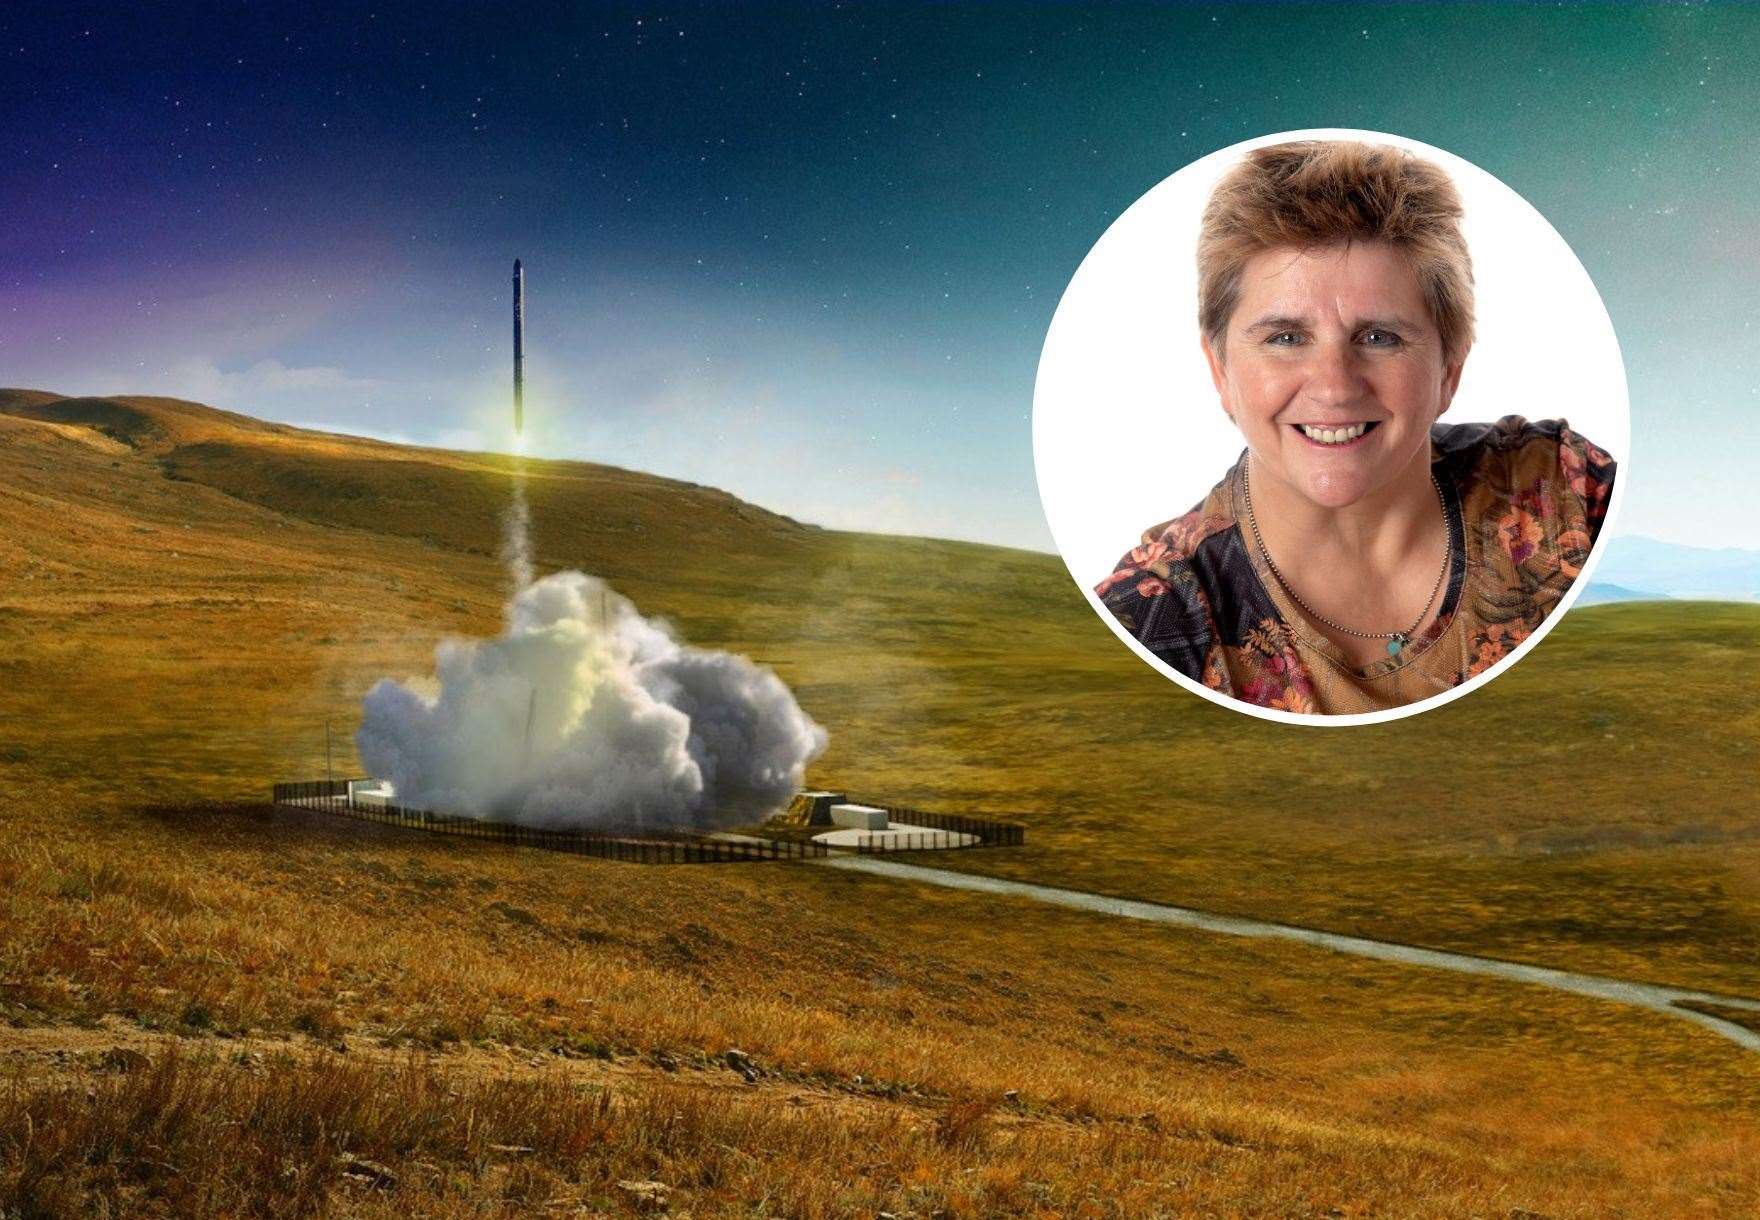 Lesley Still has been made the new chief of spaceport operations at Orbex.